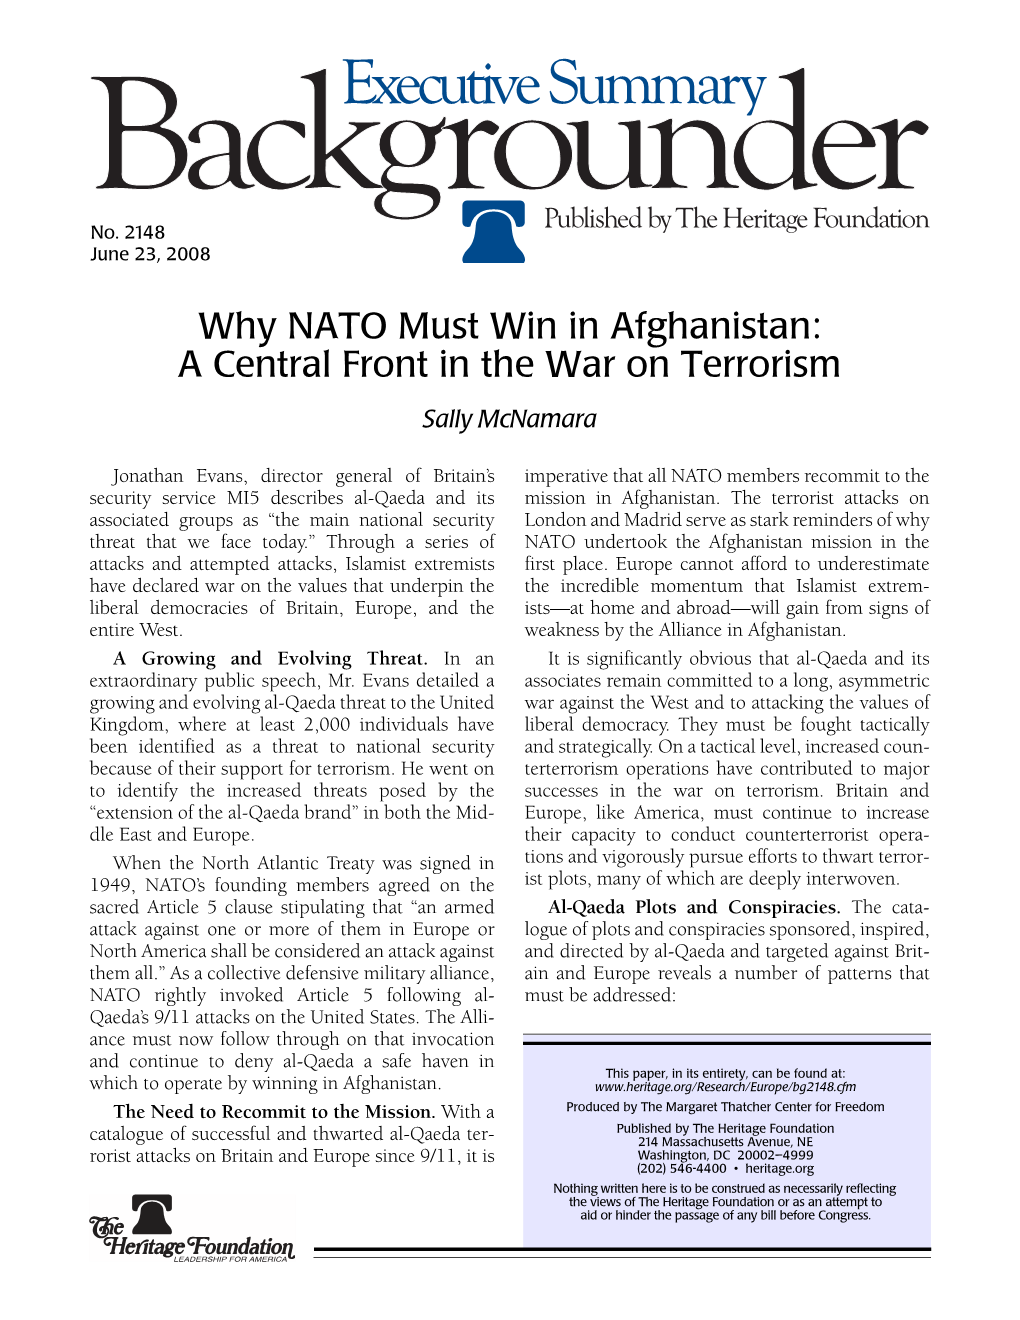 Why NATO Must Win in Afghanistan: a Central Front in the War on Terrorism Sally Mcnamara